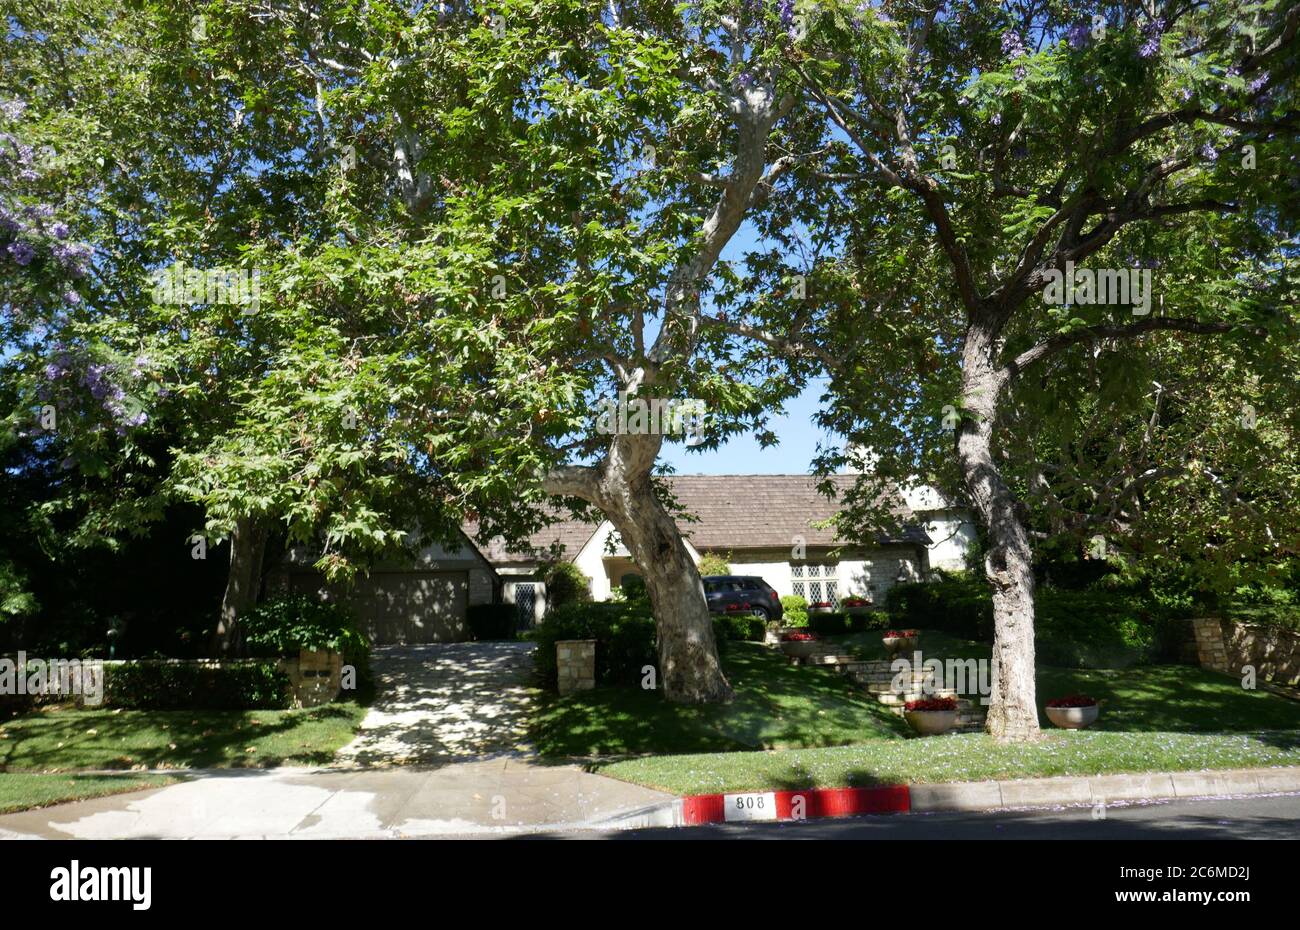 Beverly Hills, California, USA 10th July 2020 A general view of atmosphere of Howard Hughe's 1946 XF-11 plane crash debris location at 808 Whittier Drive on July 10, 2020 in Beverly Hills, California, USA. Photo by Barry King/Alamy Stock Photo Stock Photo